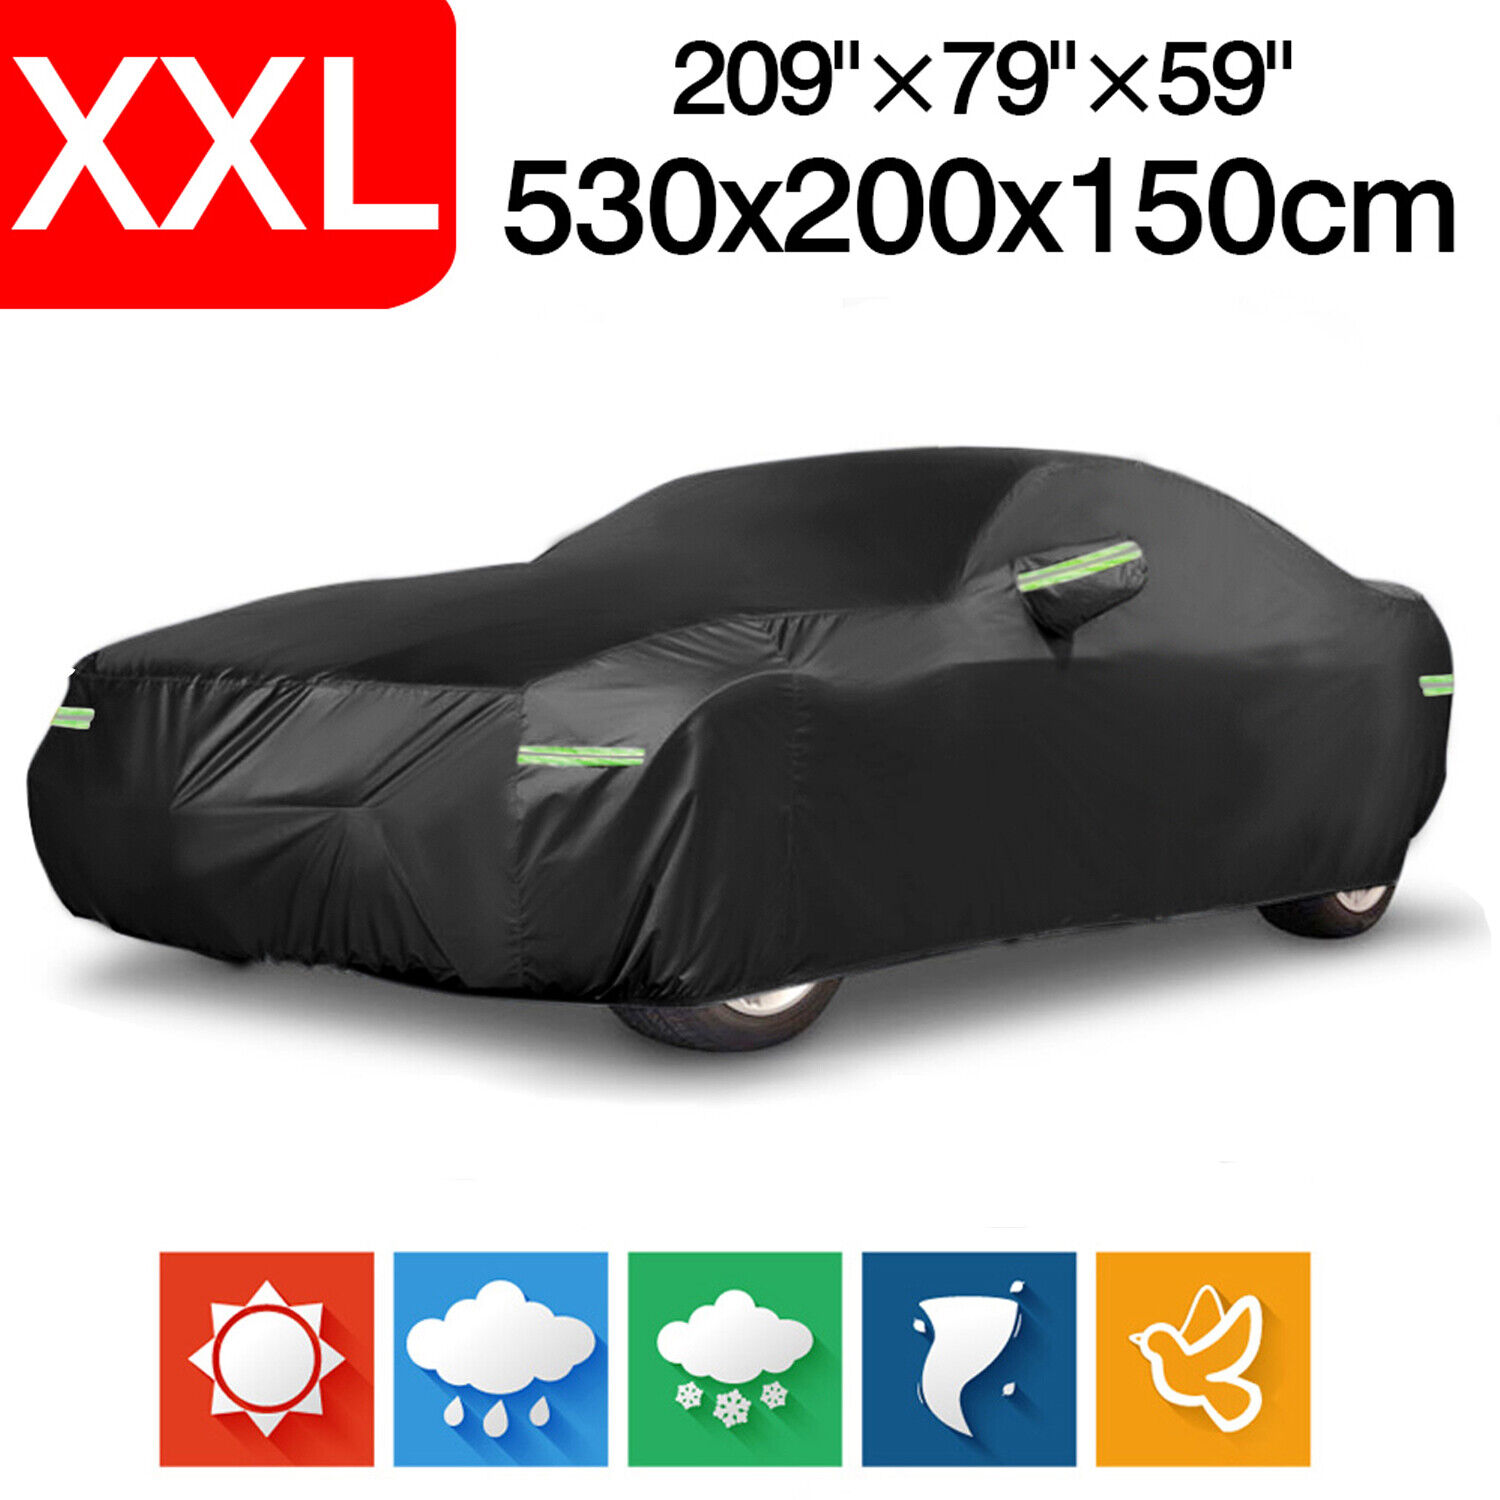 NEVERLAND Car Cover Outdoor Rain Waterproof Dust Protector For Dodge Challenger